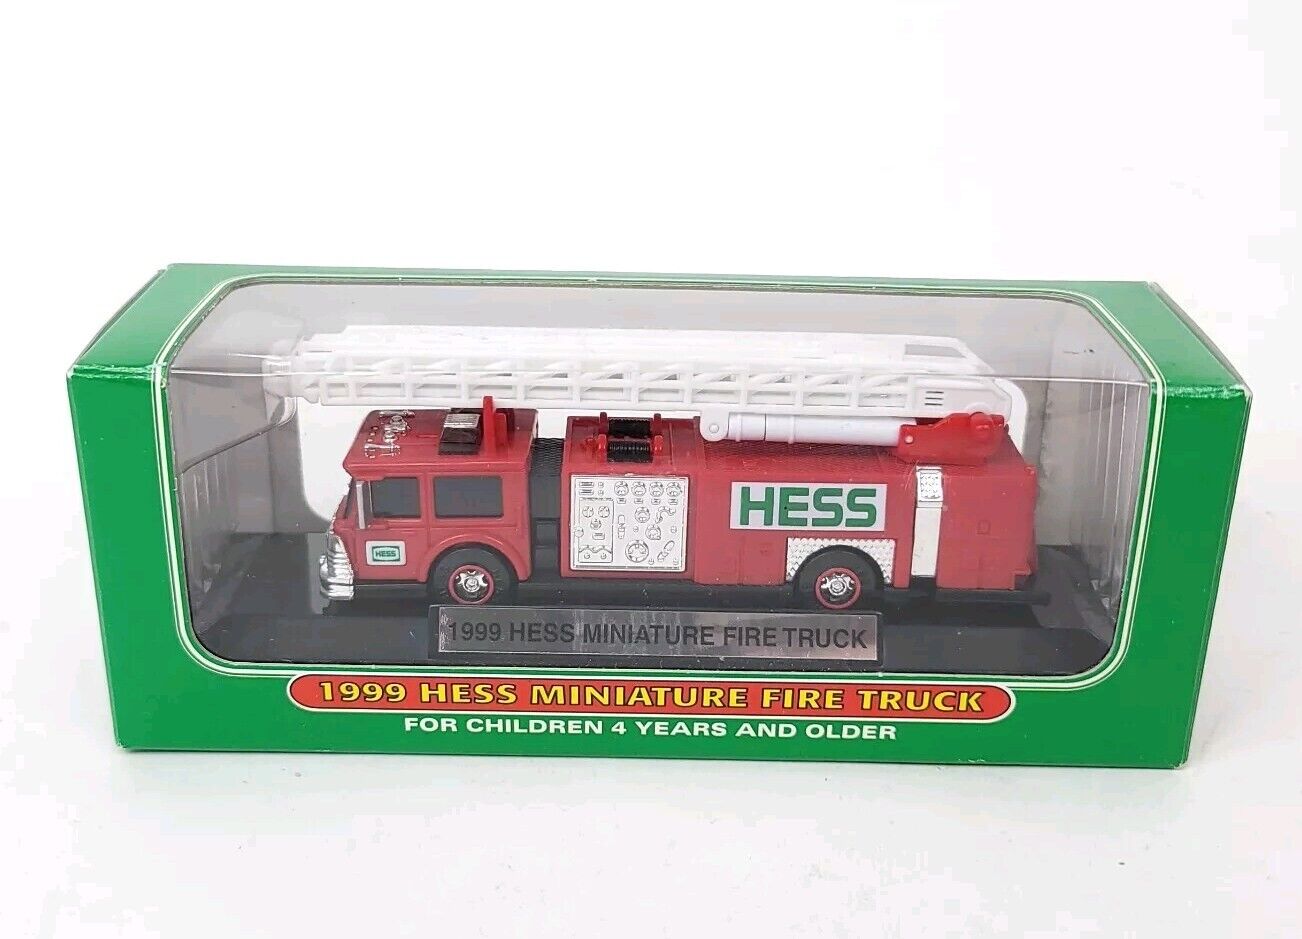 Hess Toy Mini Truck 1999 Miniature Fire Truck Collectible New In Box